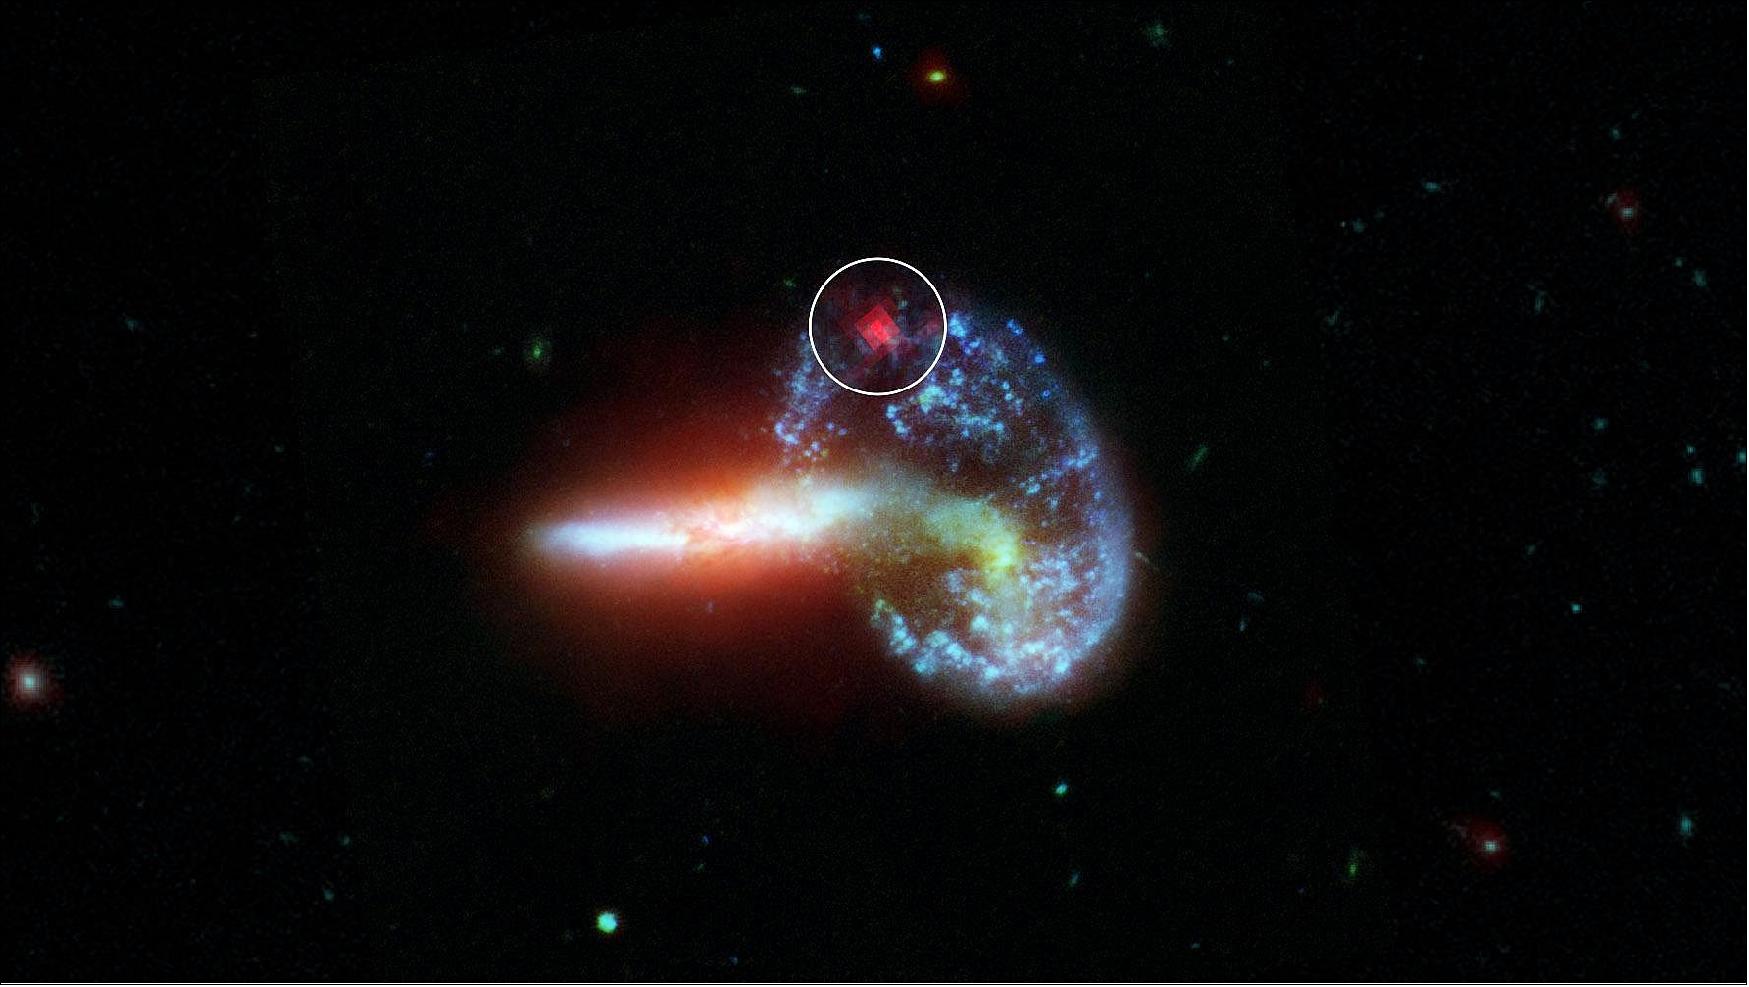 Figure 12: This image shows galaxy Arp 148, captured by NASA's Spitzer and Hubble telescopes. Inside the white circle is specially-processed Spitzer data, which reveals infrared light from a supernova that is hidden by dust. Supernovae are massive stars that have exploded after running out of fuel. They radiate most brightly in visible light (the kind the human eye can detect), but these wavelengths are obscured by dust. Infrared light, however, can pass through dust. The analysis of Arp 148 was part of an effort to find hidden supernovae in 40 dust-choked galaxies that also emit high levels of infrared light. These galaxies are known as luminous and ultra-luminous infrared galaxies (LIRGs and ULIRGs, respectively). The dust in LIRGs and ULIRGs absorbs optical light from objects like supernovae but allows infrared light from these same objects to pass through unobstructed for telescopes like Spitzer to detect (image credit: NASA/JPL-Caltech)